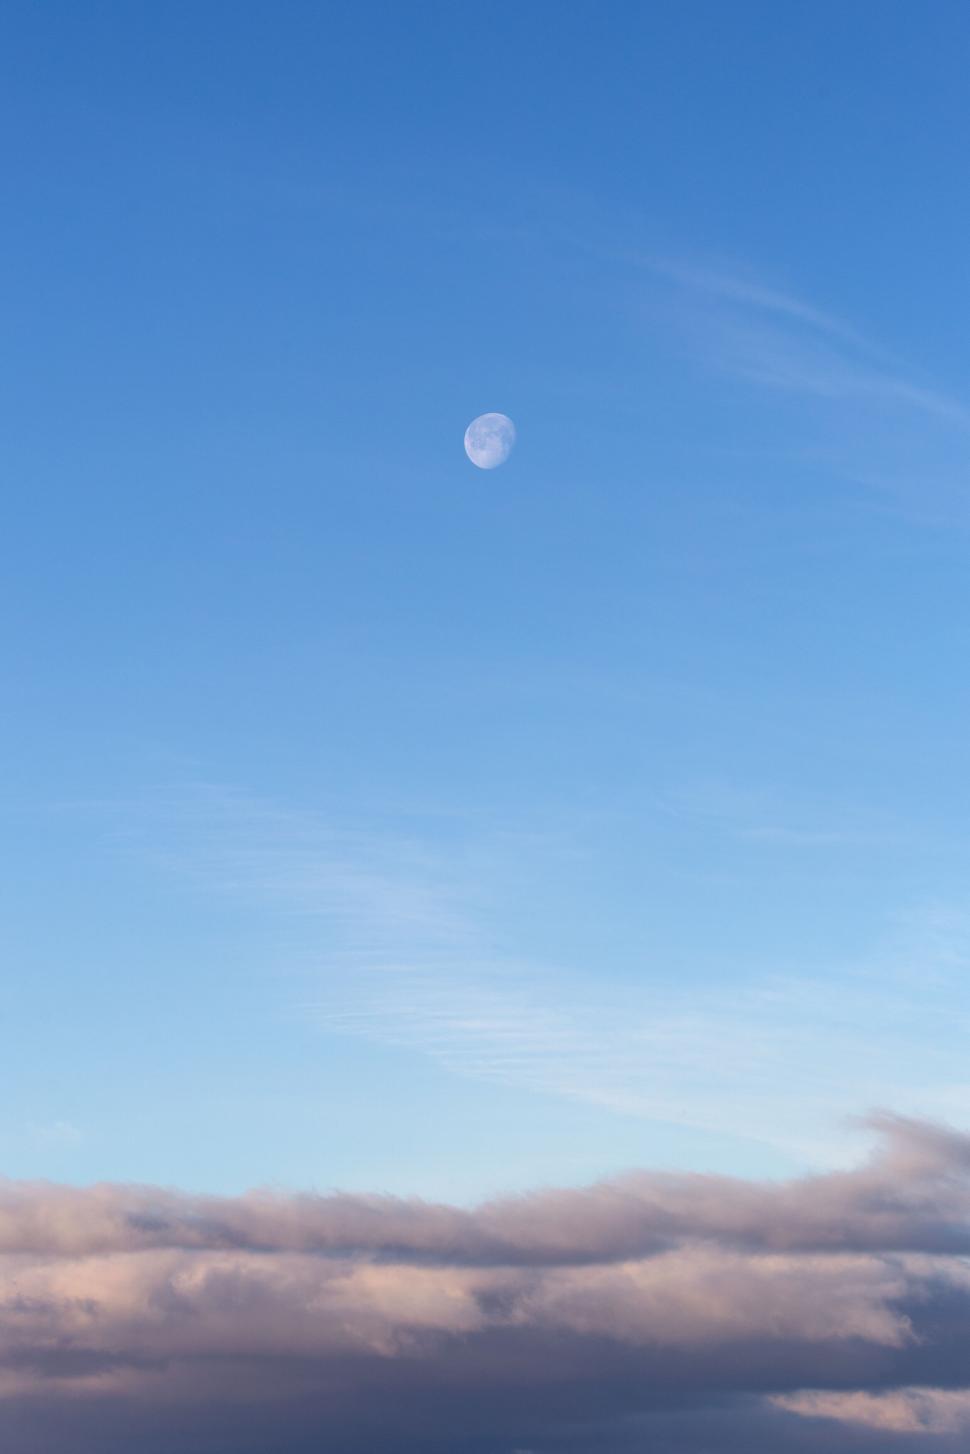 Free Image of Daytime sky with a visible full moon 